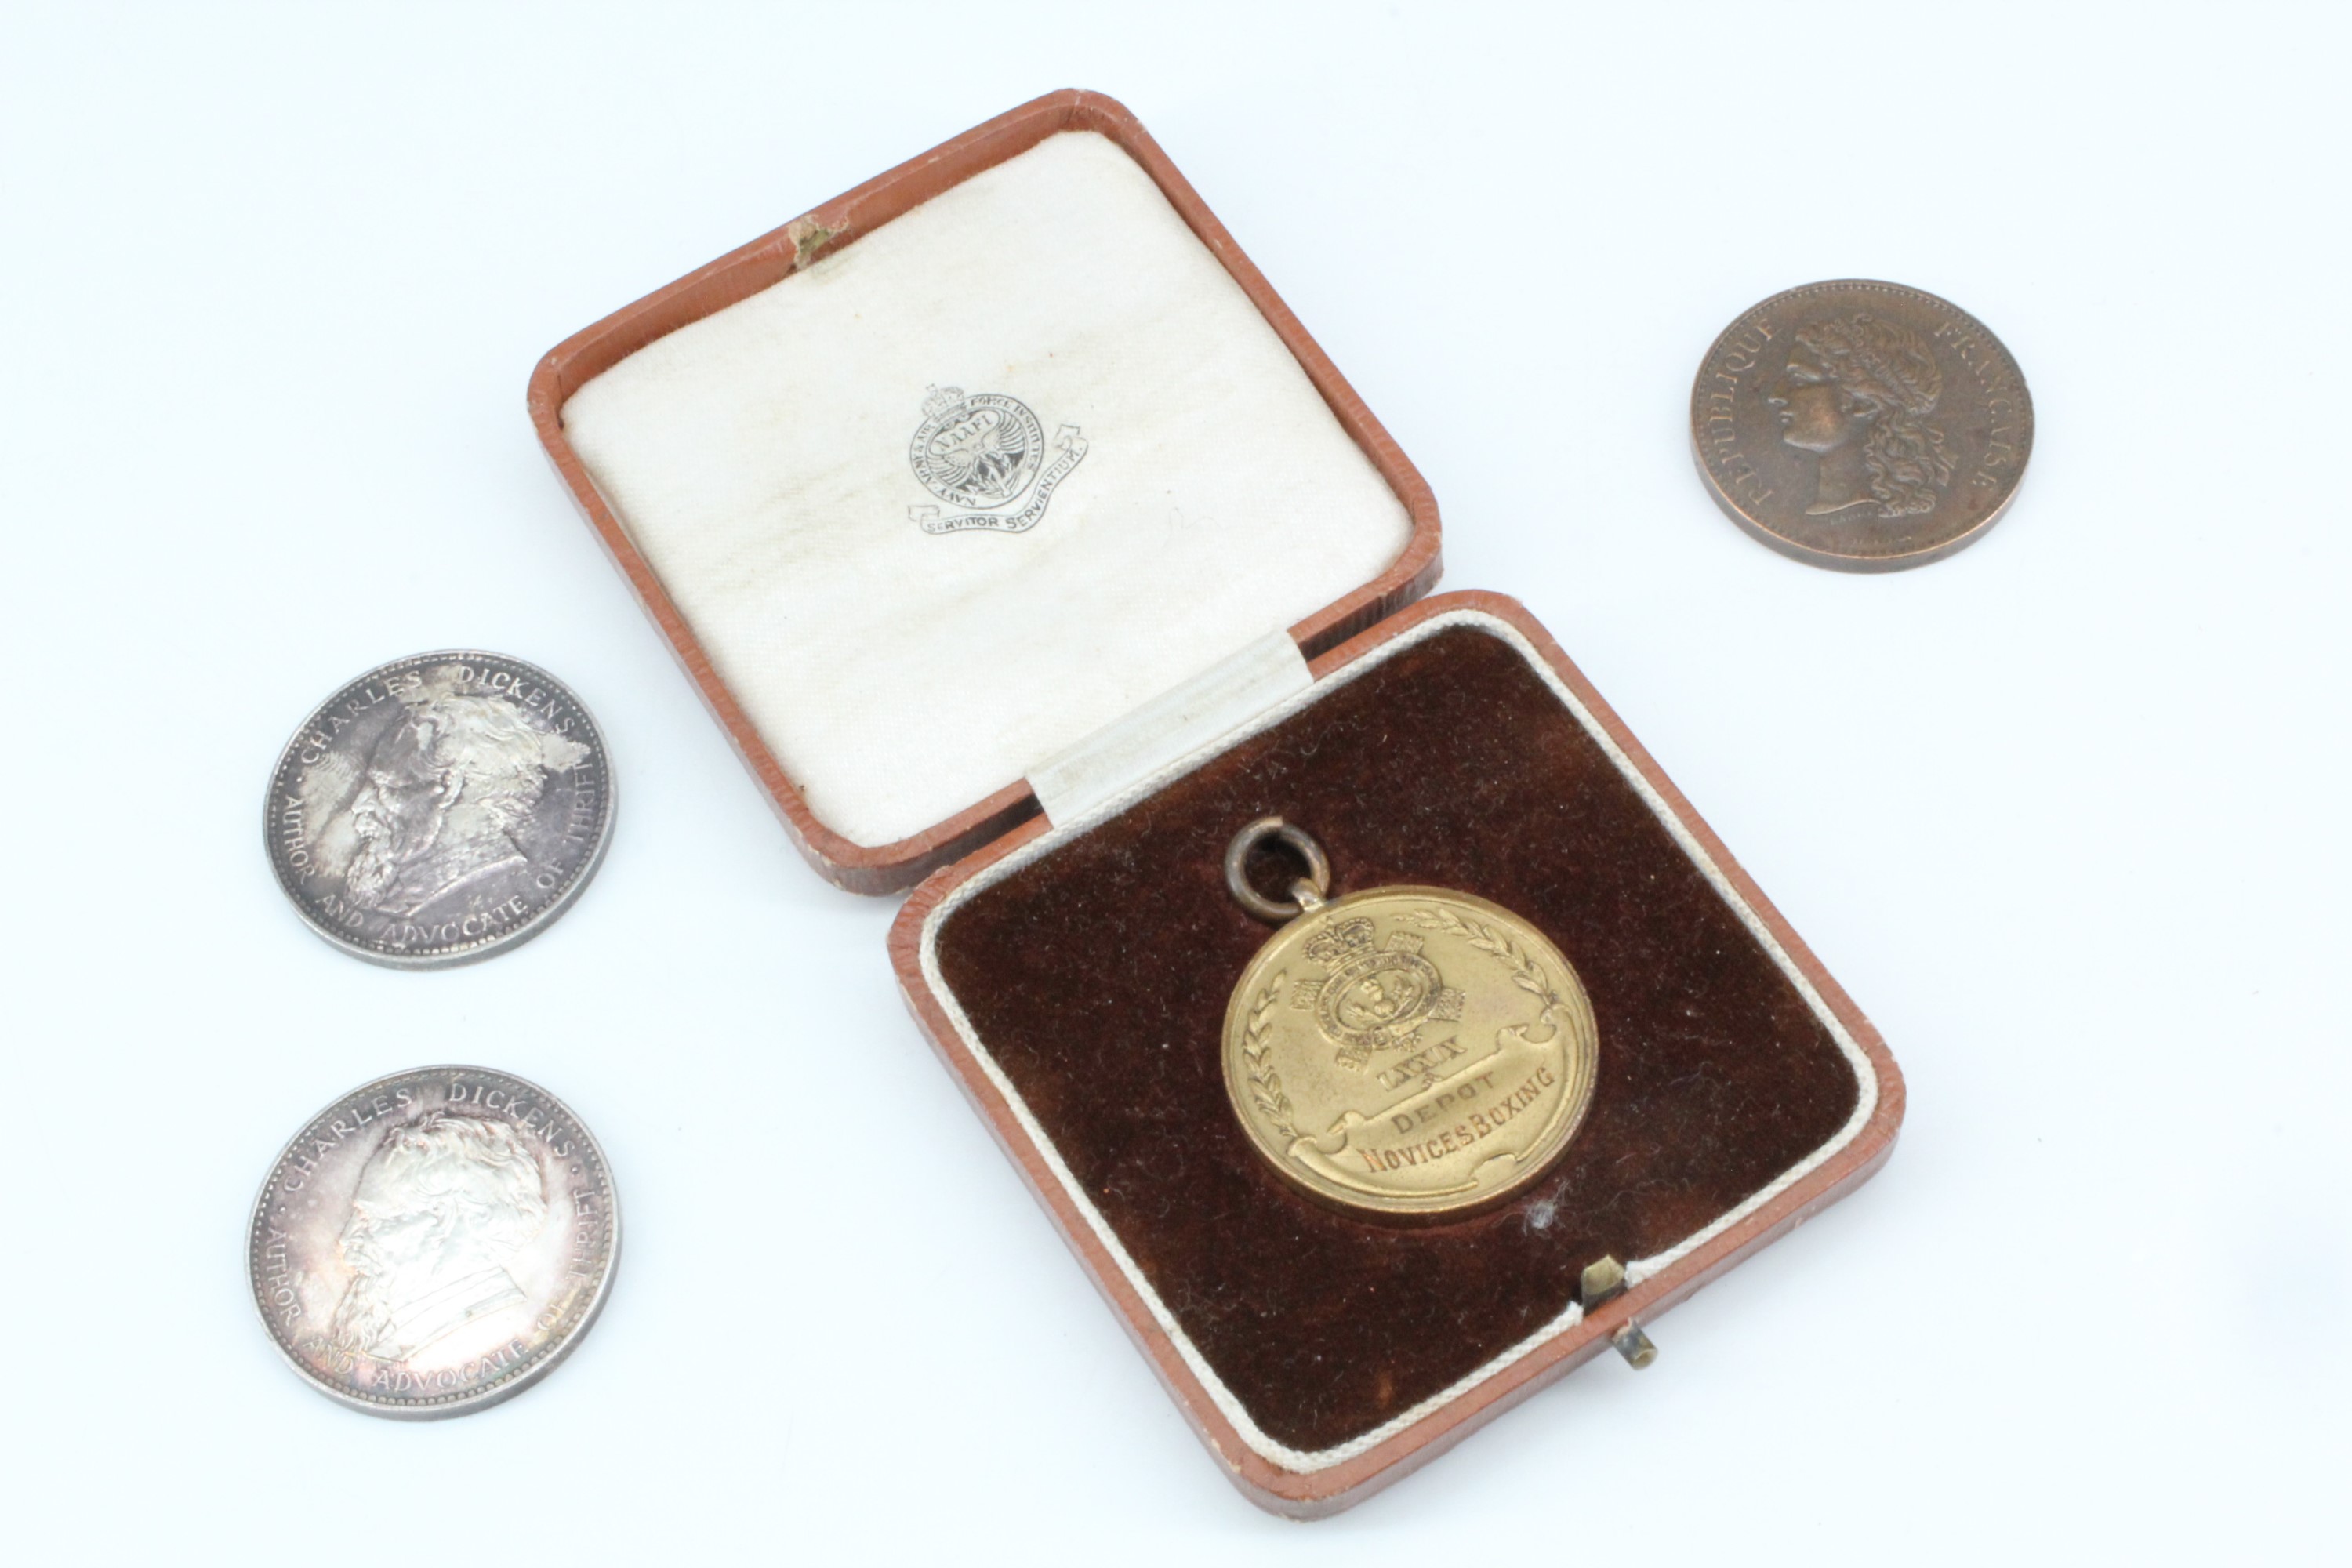 A military prize medallion, an 1879 French centenary of the Revolution Exposition Universelle